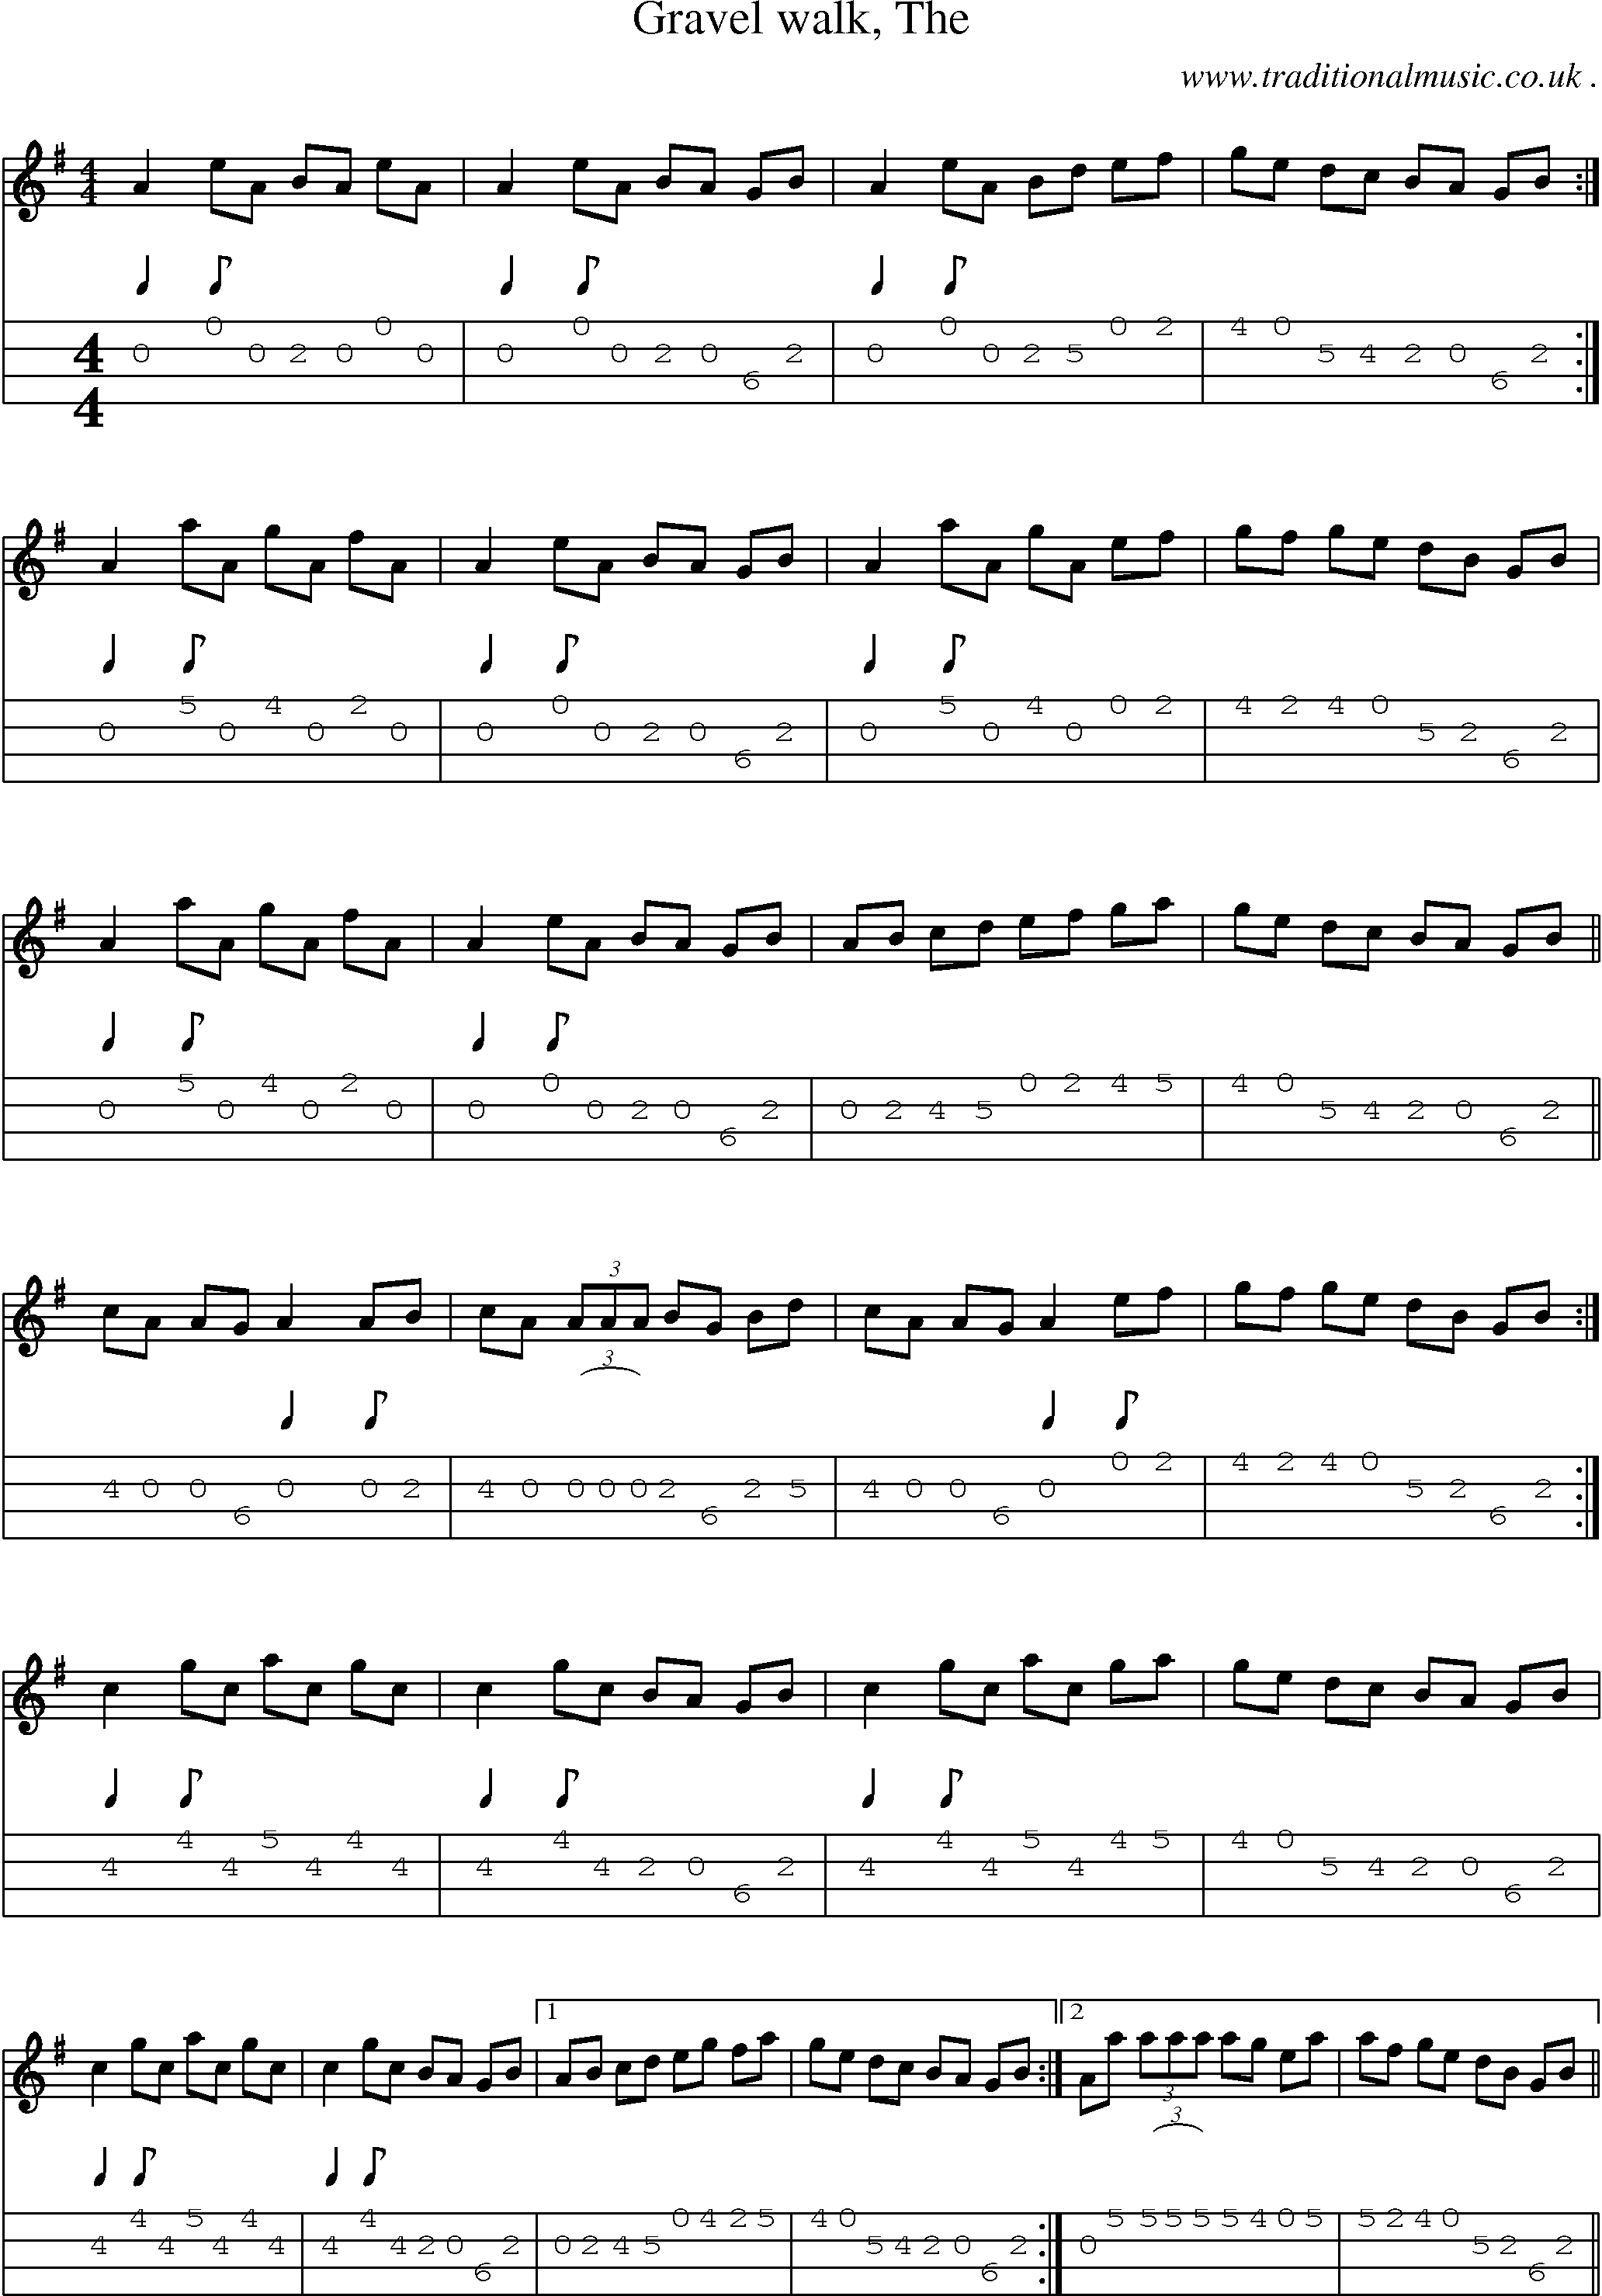 Sheet-music  score, Chords and Mandolin Tabs for Gravel Walk The